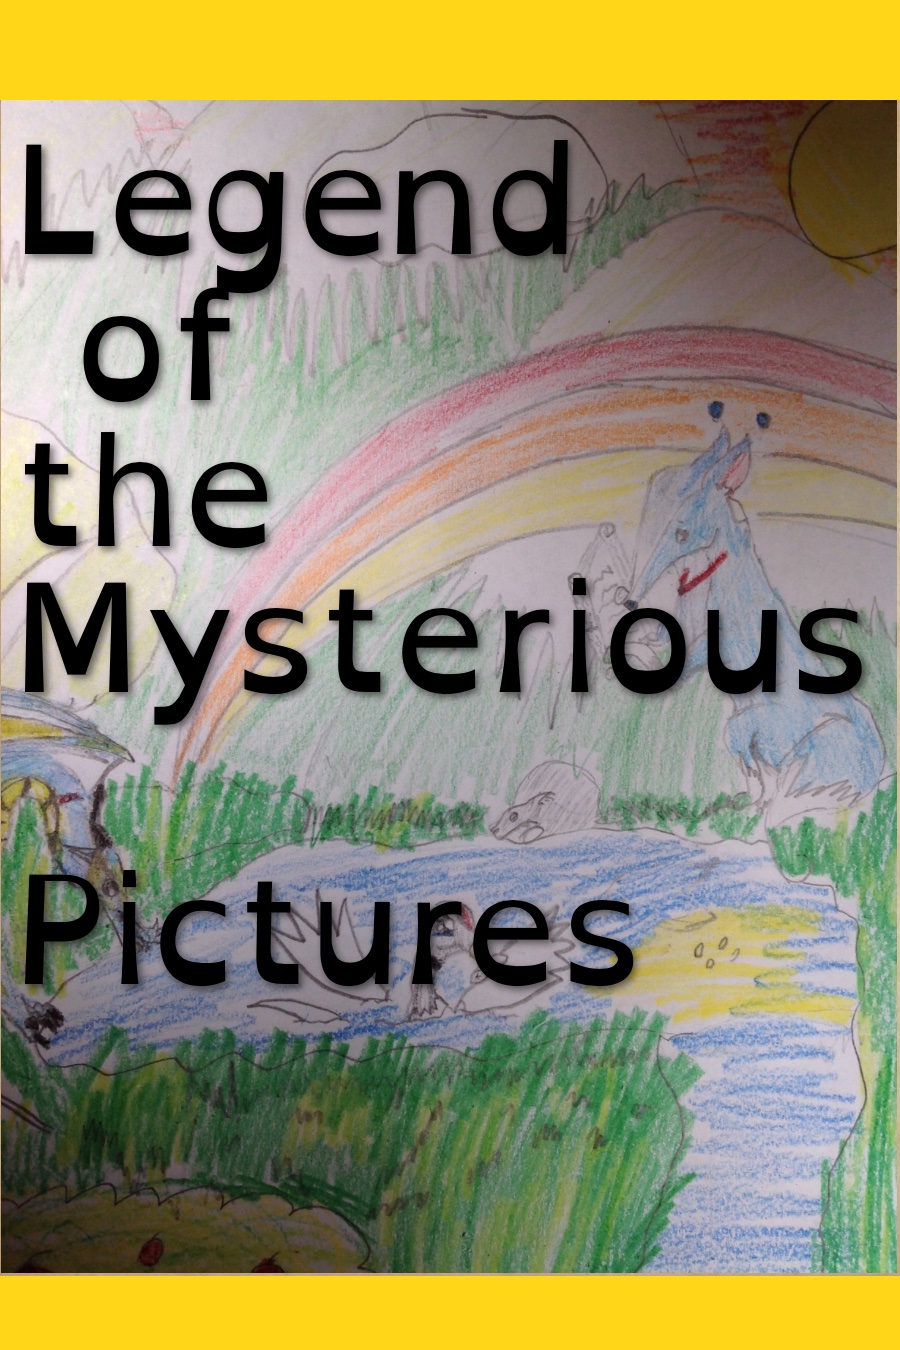 A Legend of the Mysterious Pictures by Logan W